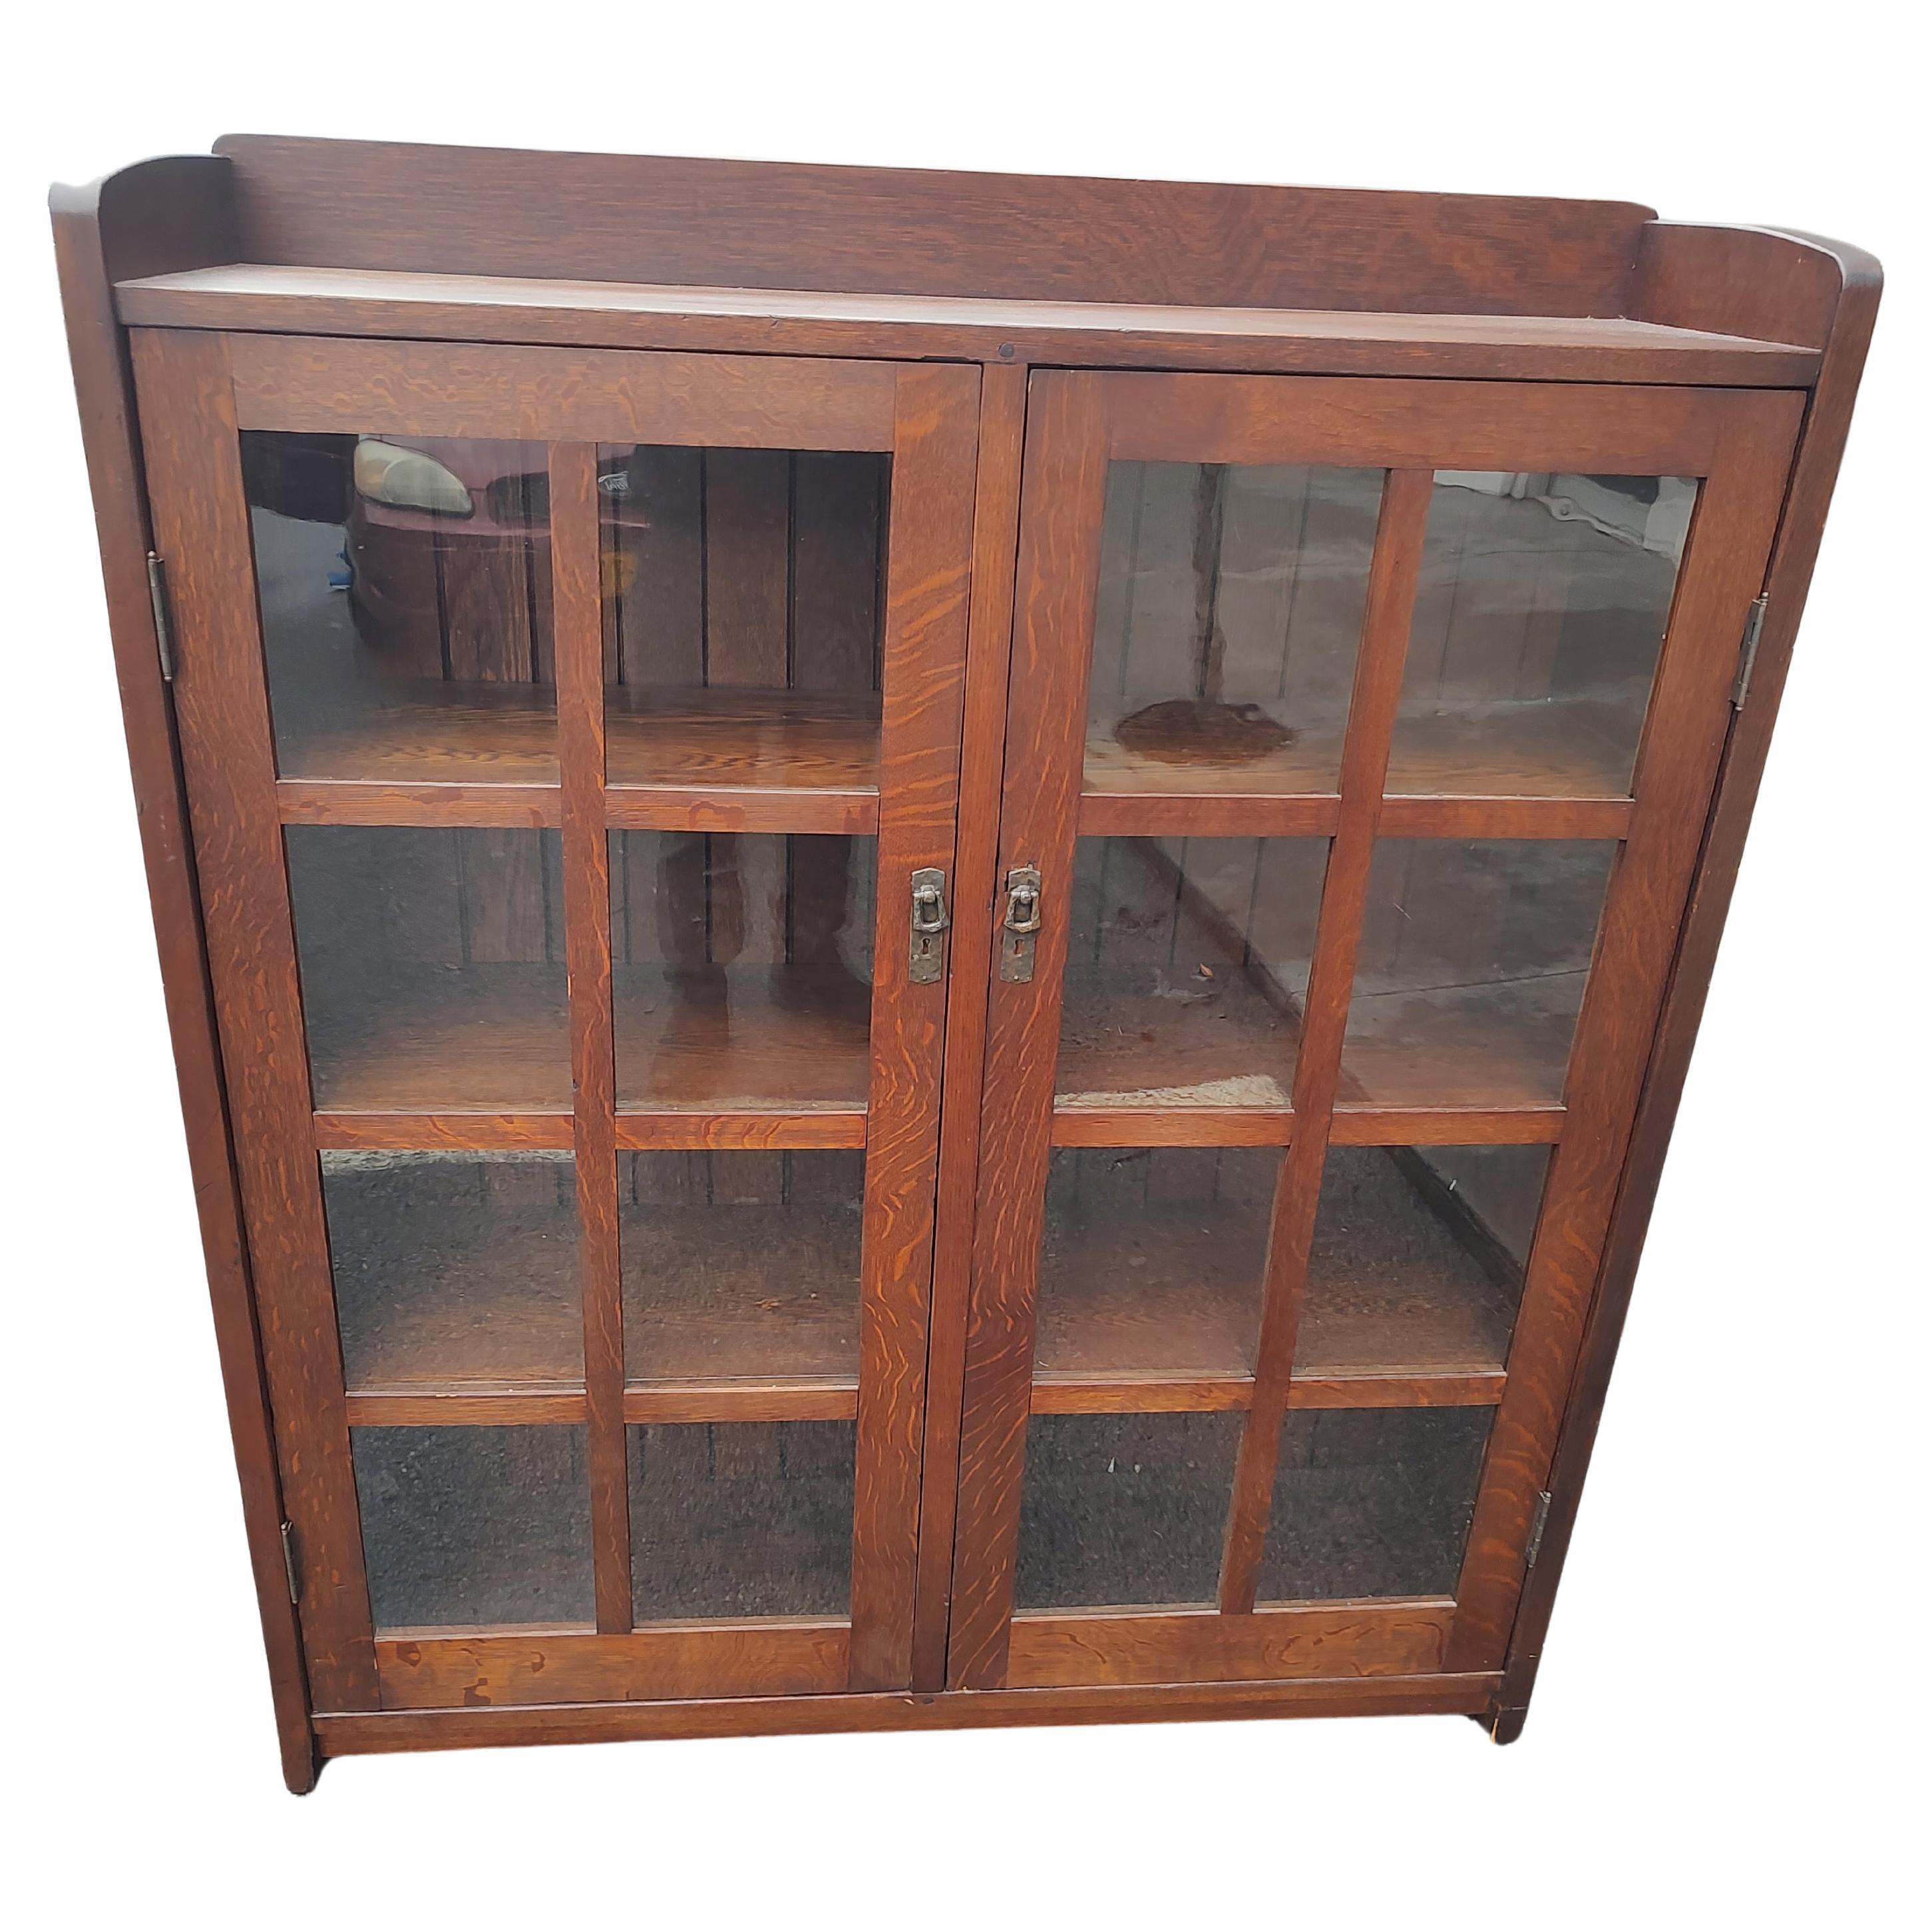 Mission Oak Arts & Crafts Gustav Stickley #717 Craftsman Two Door Bookcase C1910 In Good Condition For Sale In Port Jervis, NY